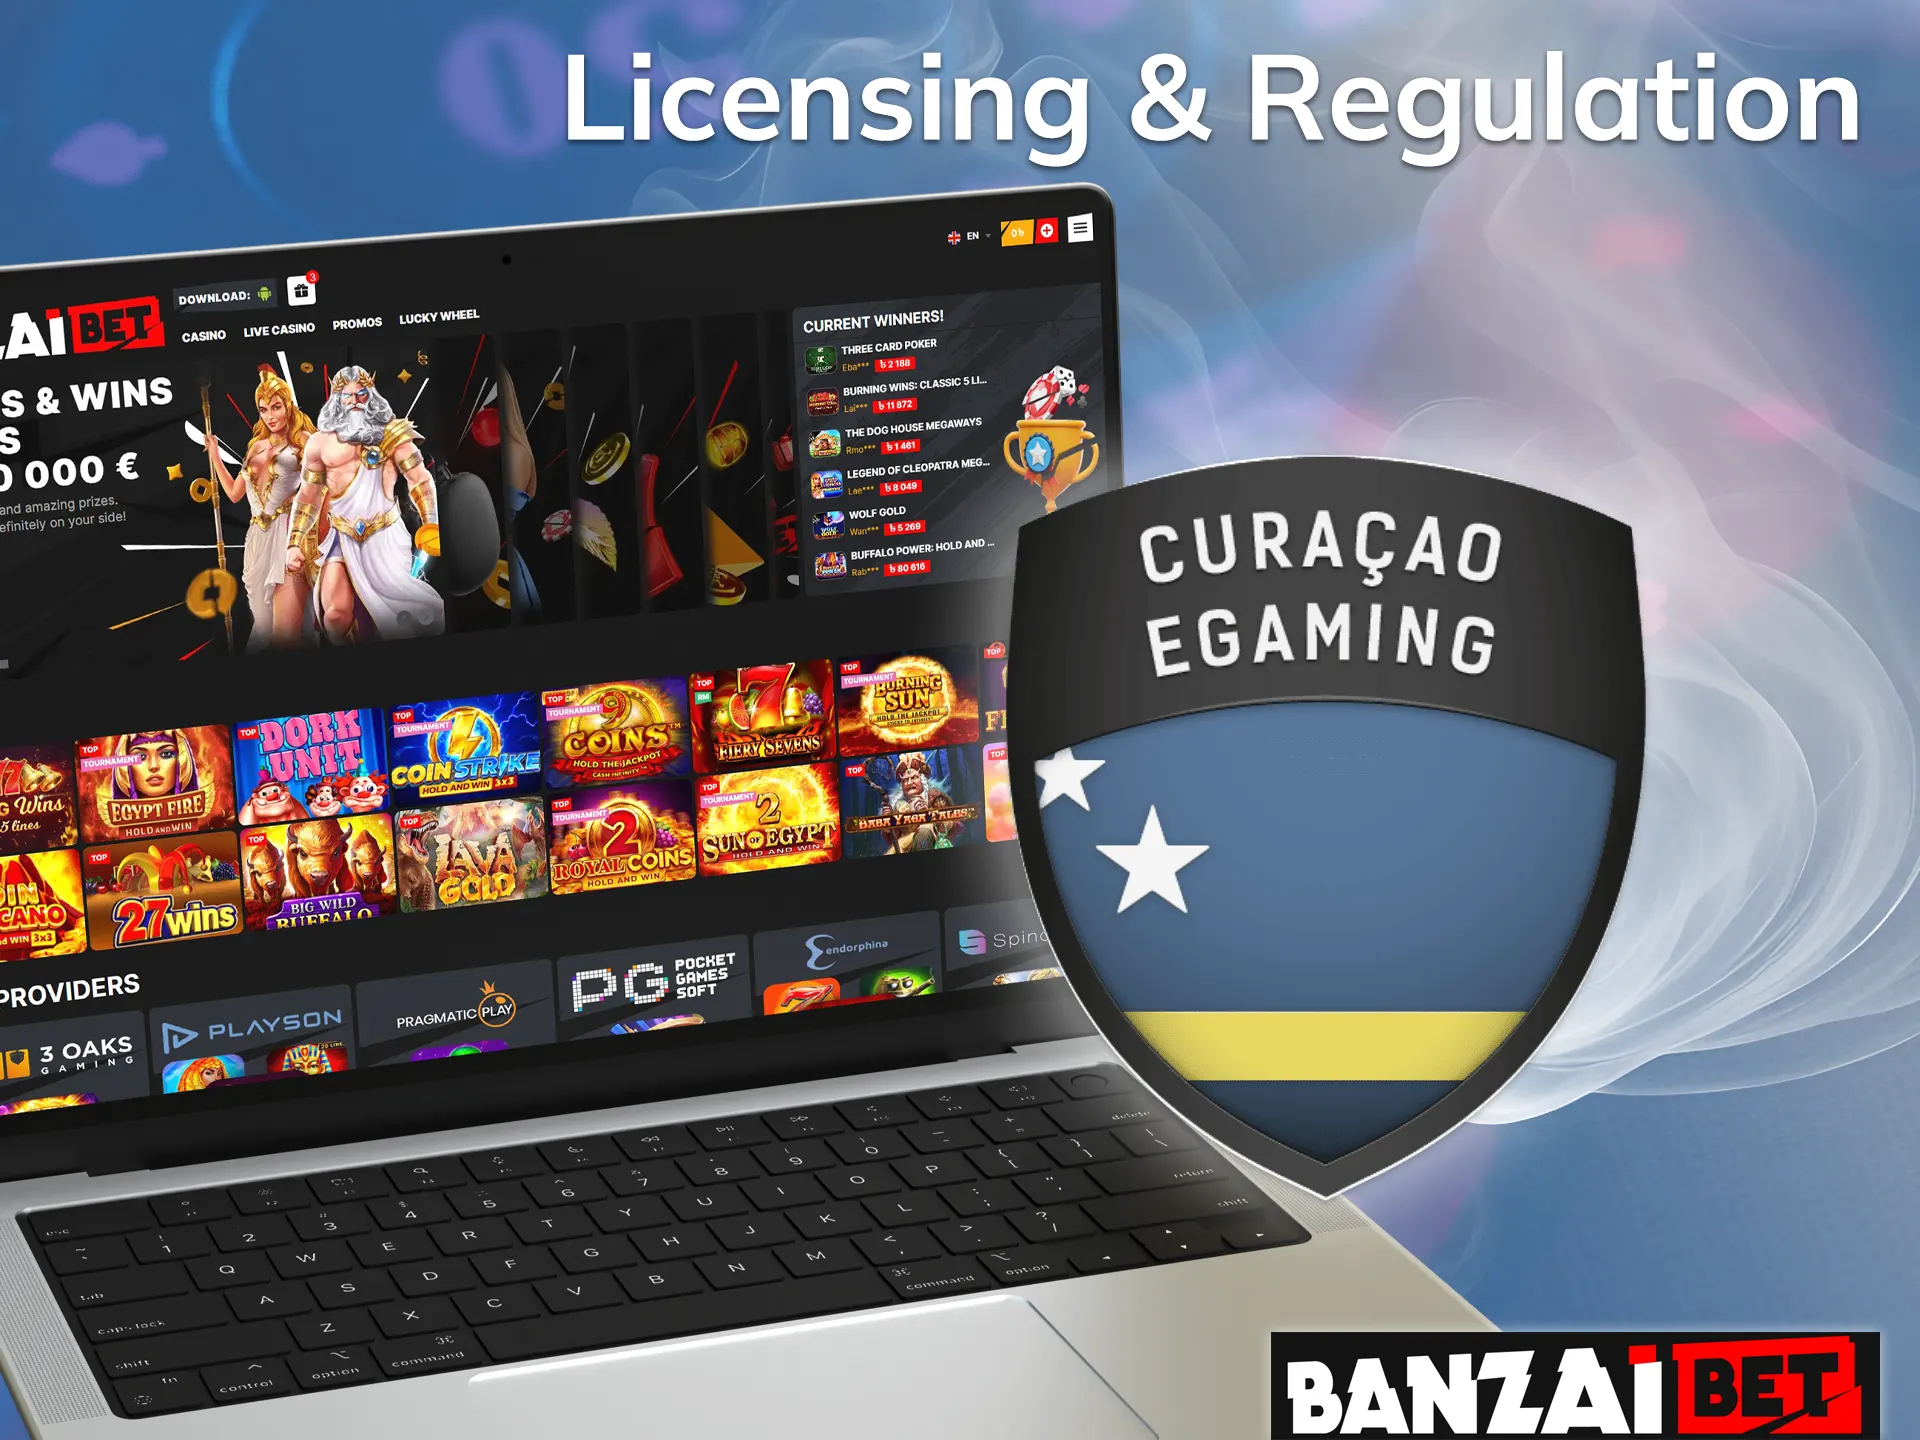 Banzai Bet is a licensed online casino.